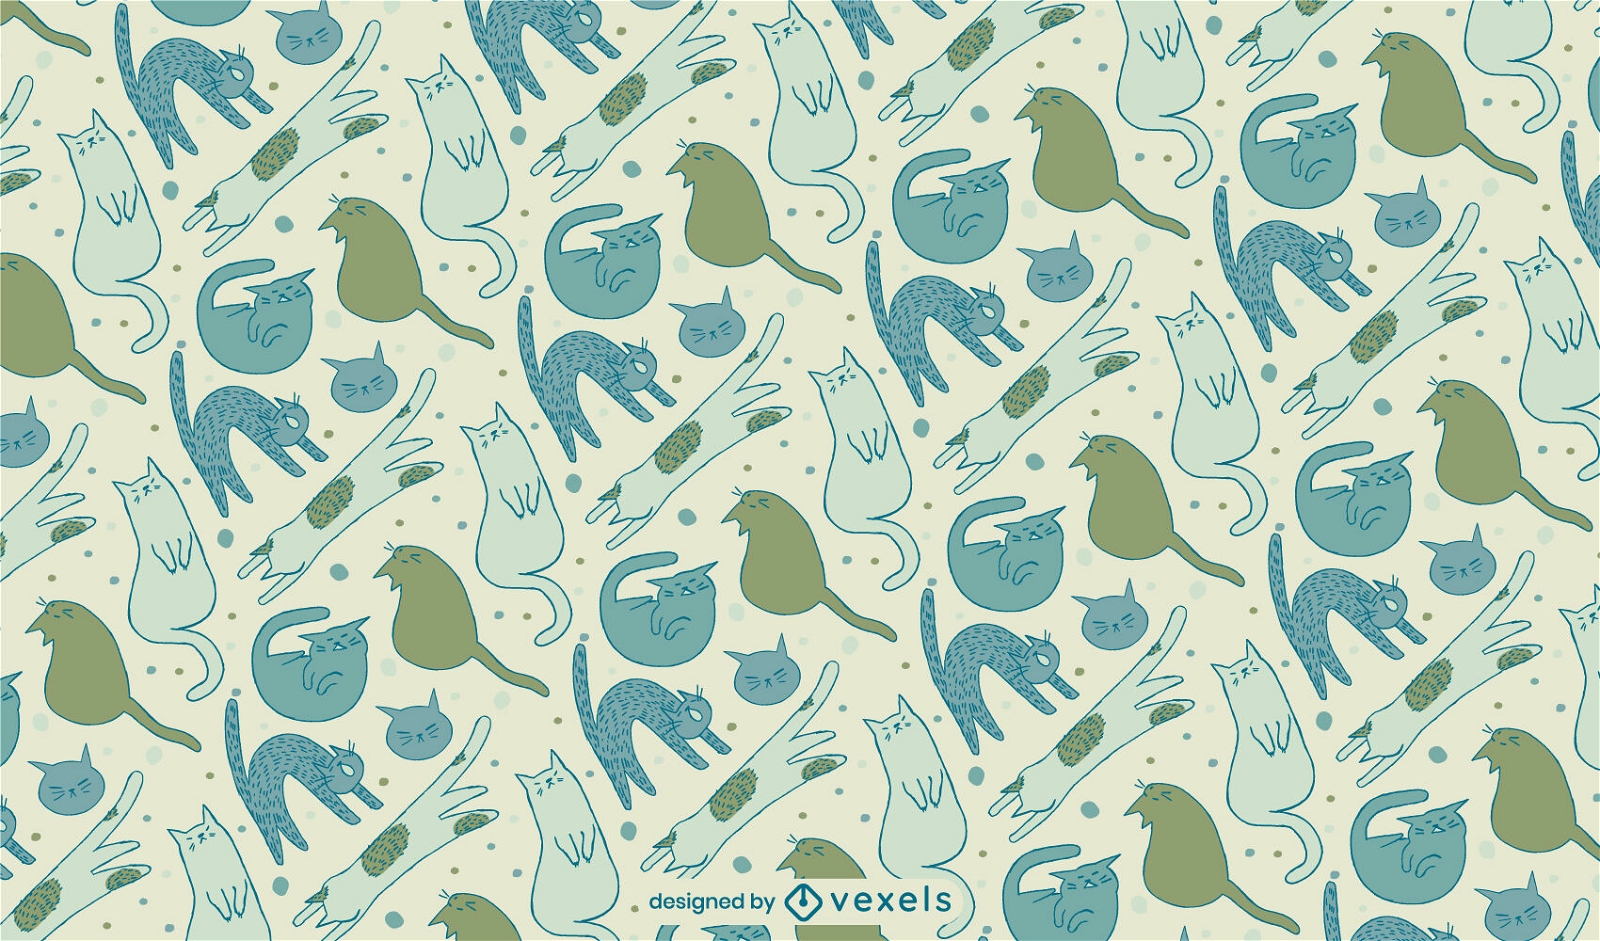 Cats green and blue doodle pattern